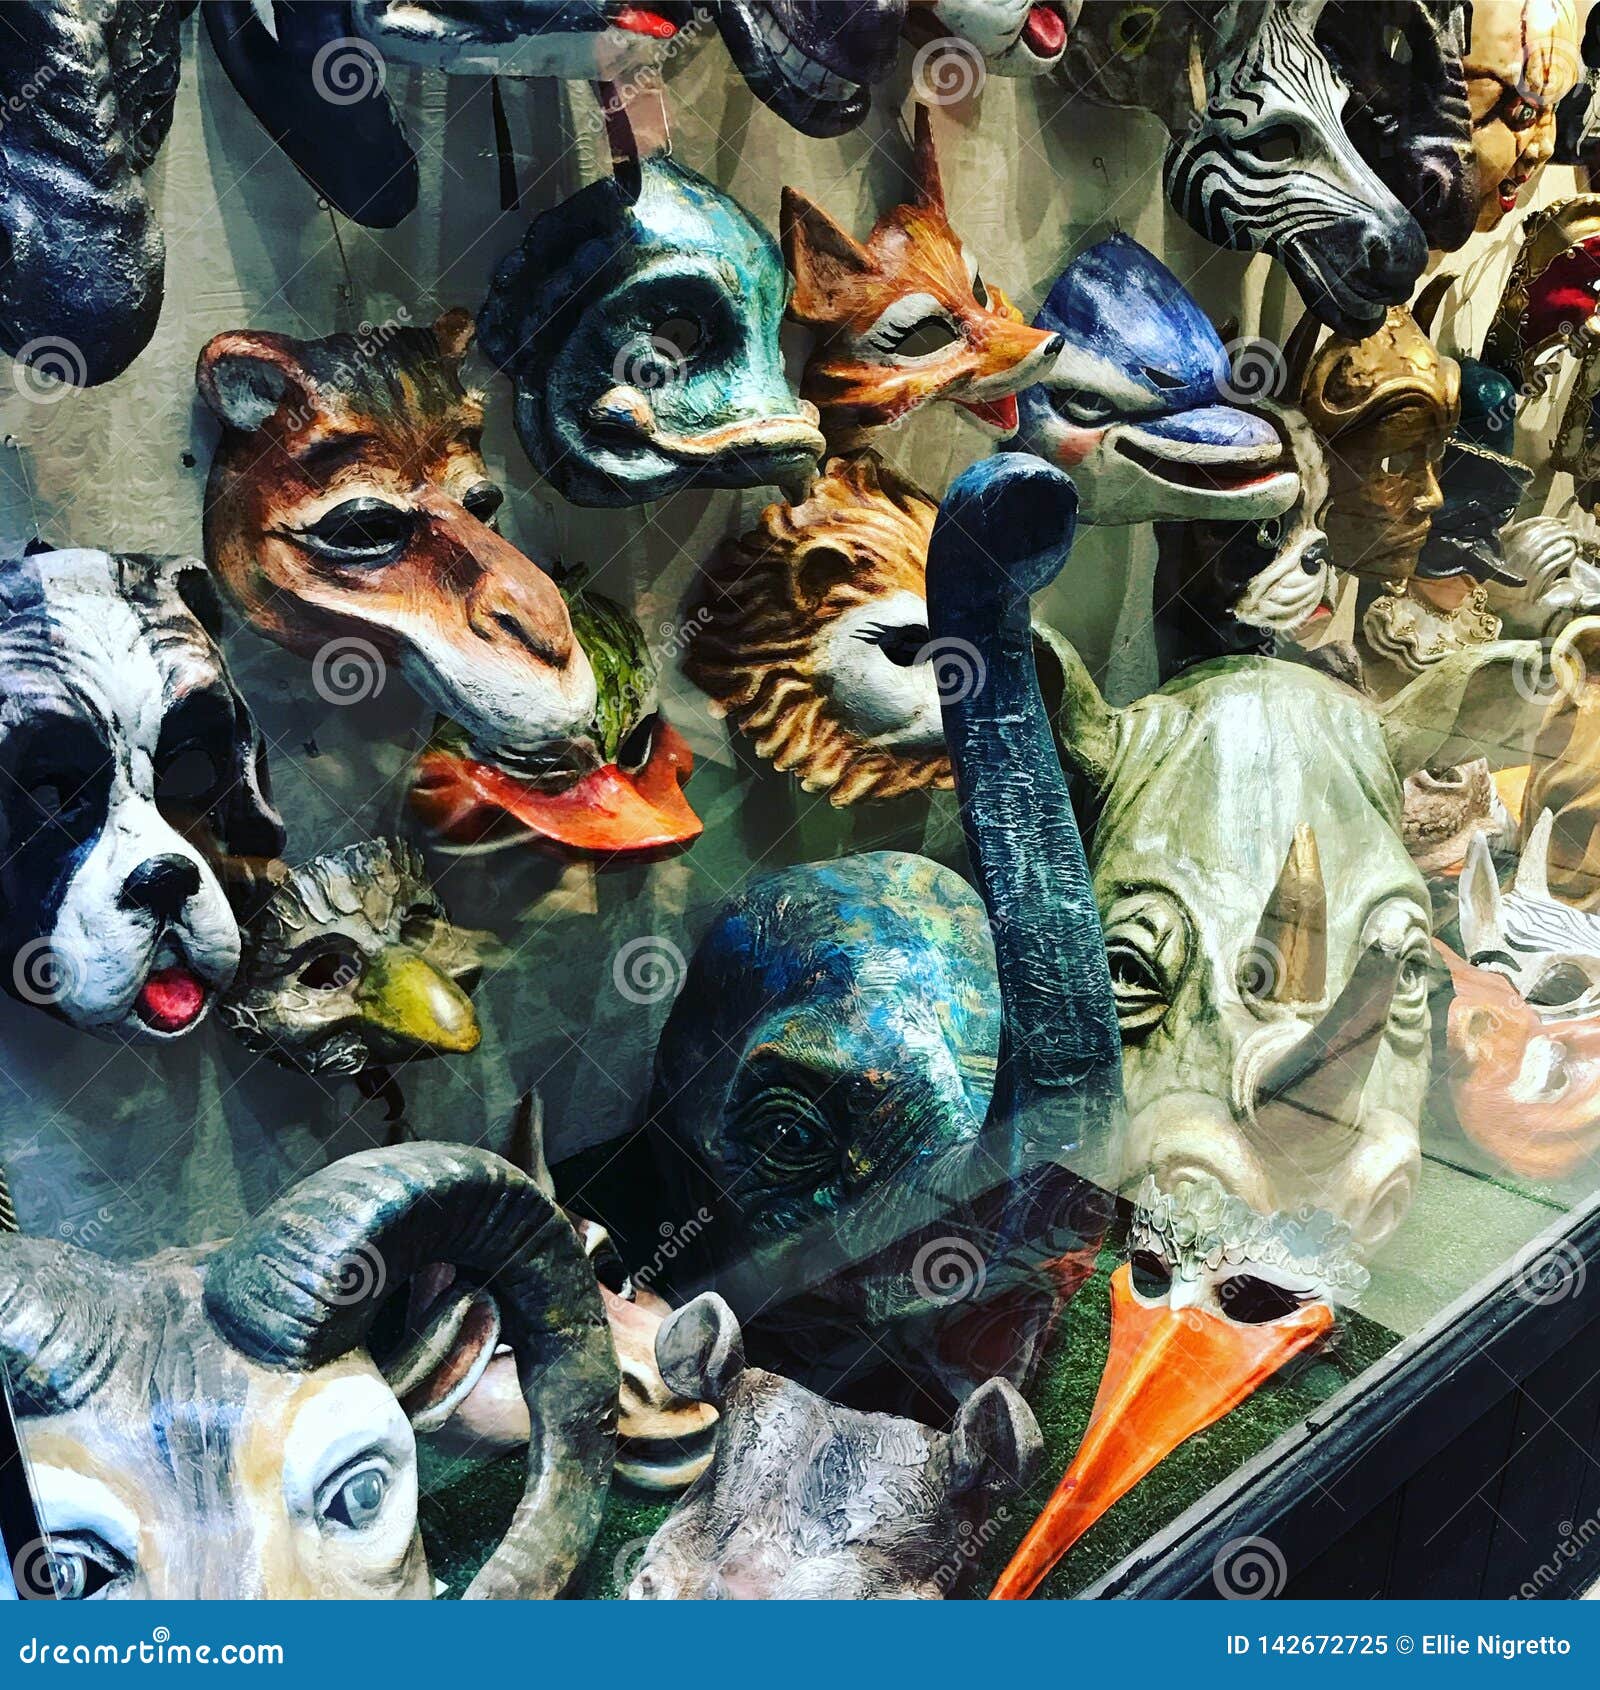 Handmade Leather Animal Masks for Venetian Carnival, Venice, Italy  Editorial Image - Image of masks, italy: 142672725